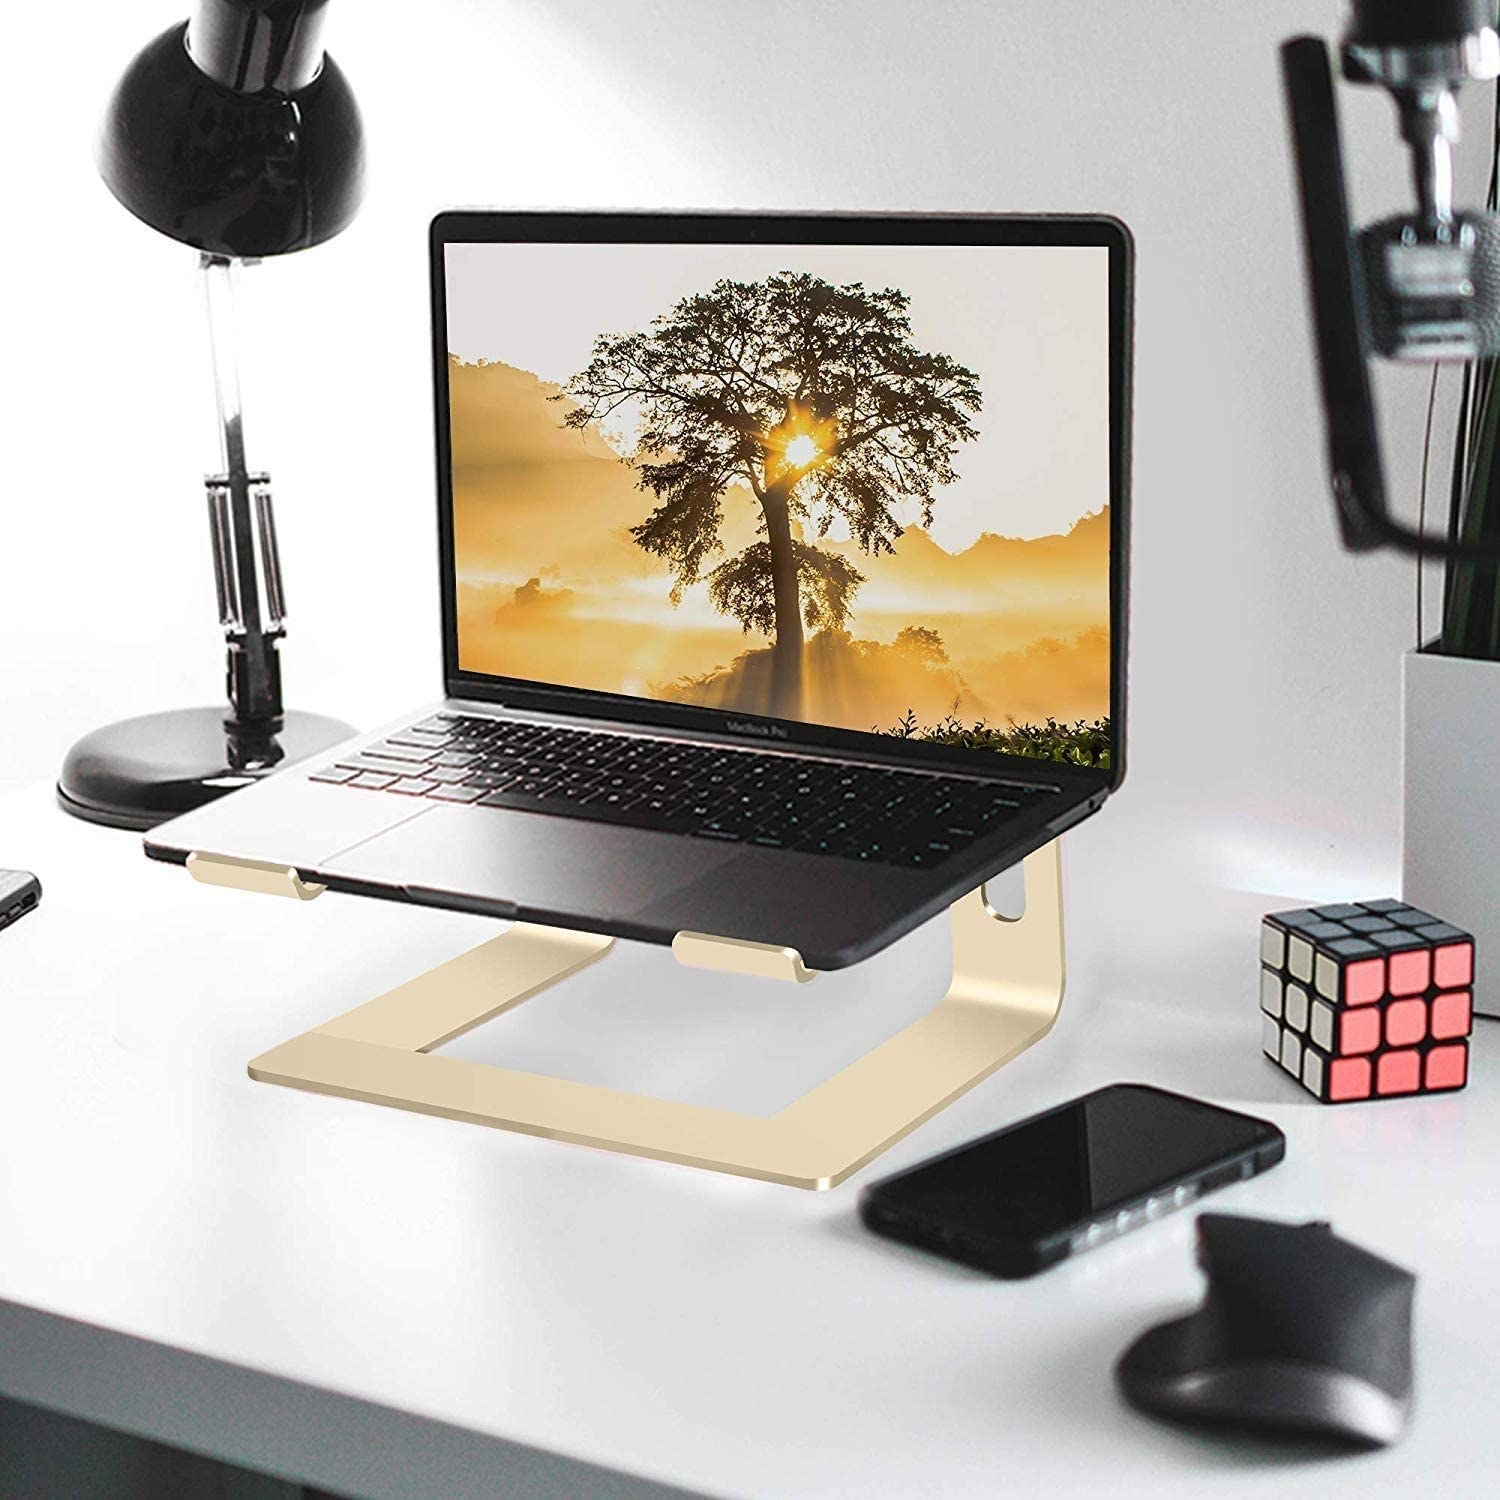 A slim aluminum laptop stand elevating a computer on a desk